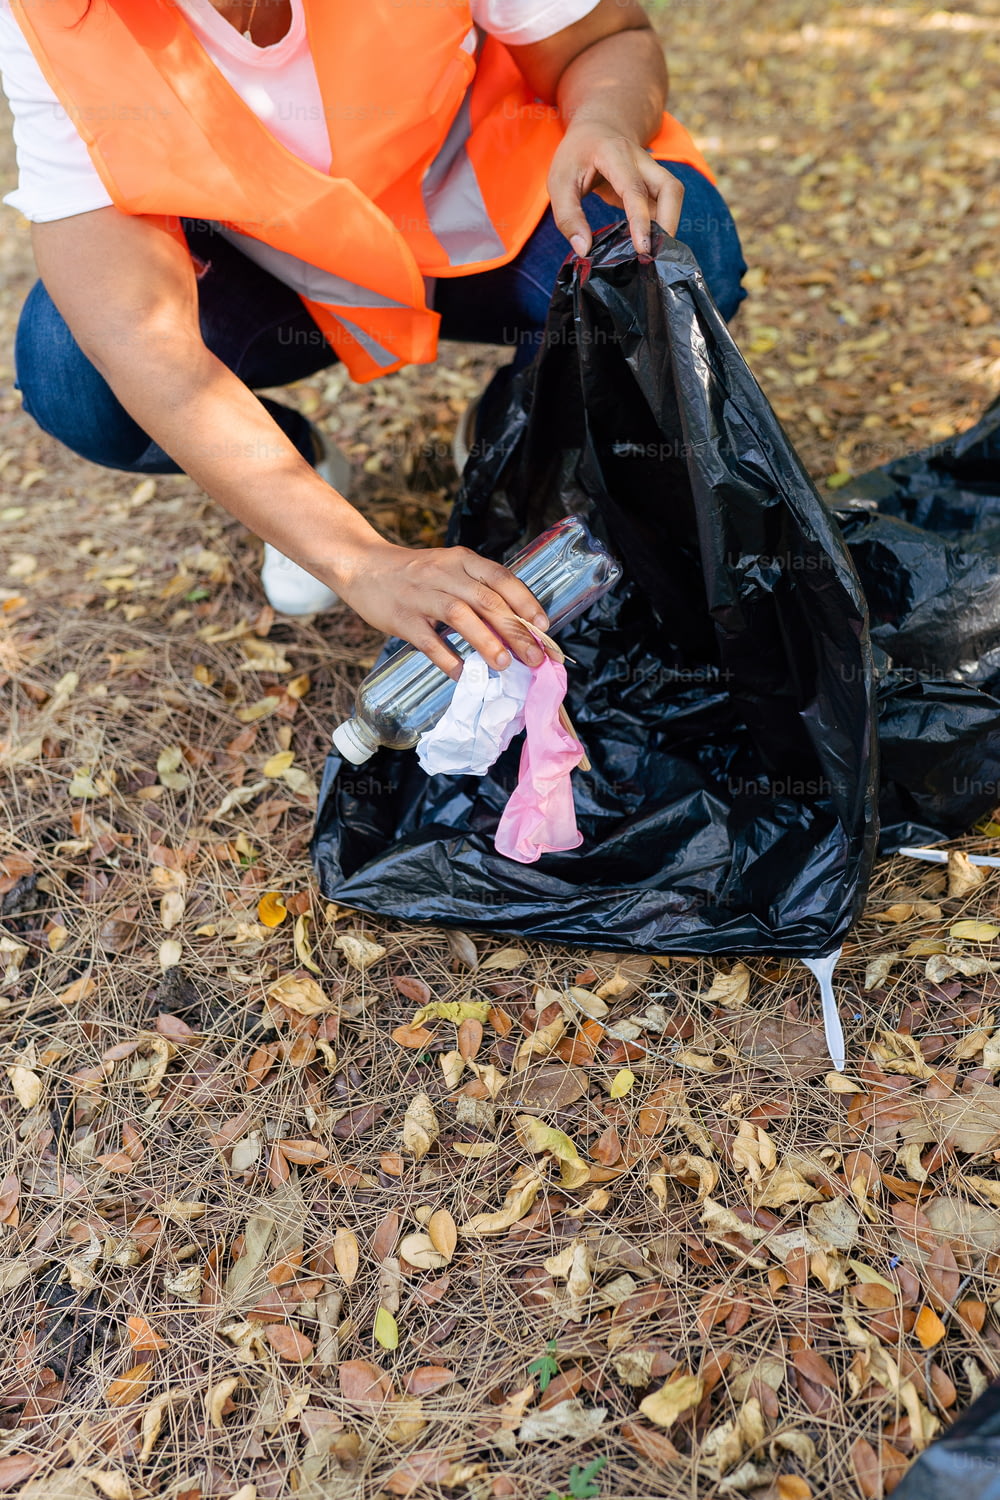 a woman in an orange vest is picking up trash